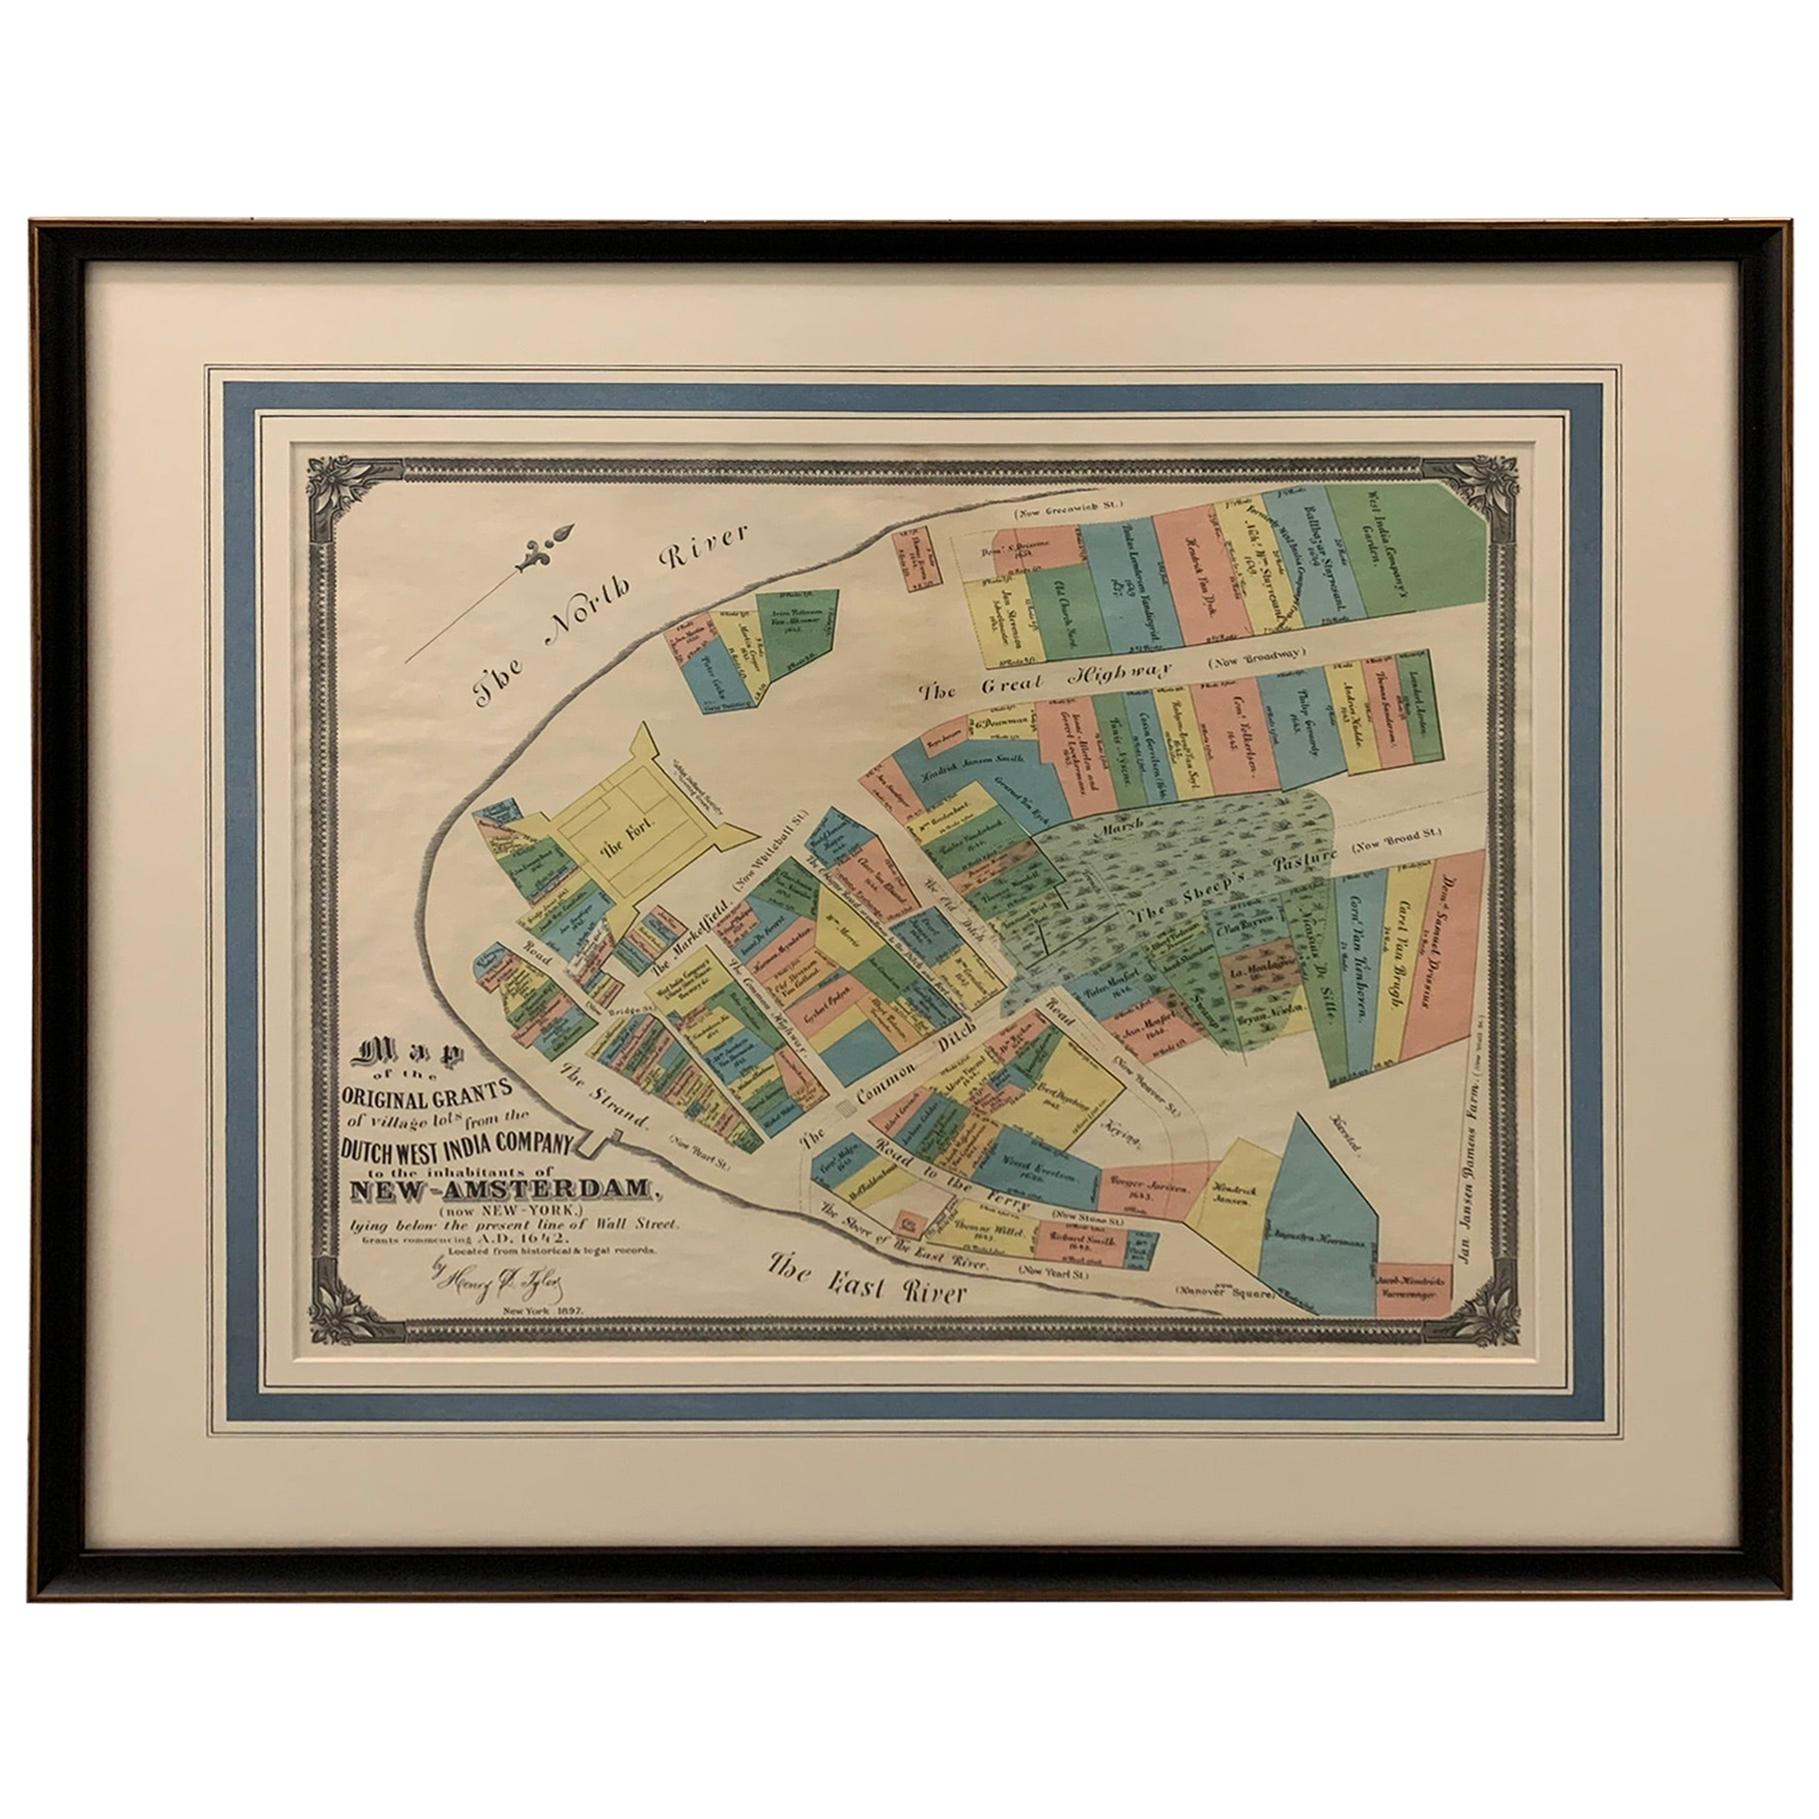 1897 Edition of Dutch West India Co. New Amsterdam, 1642 Map Framed